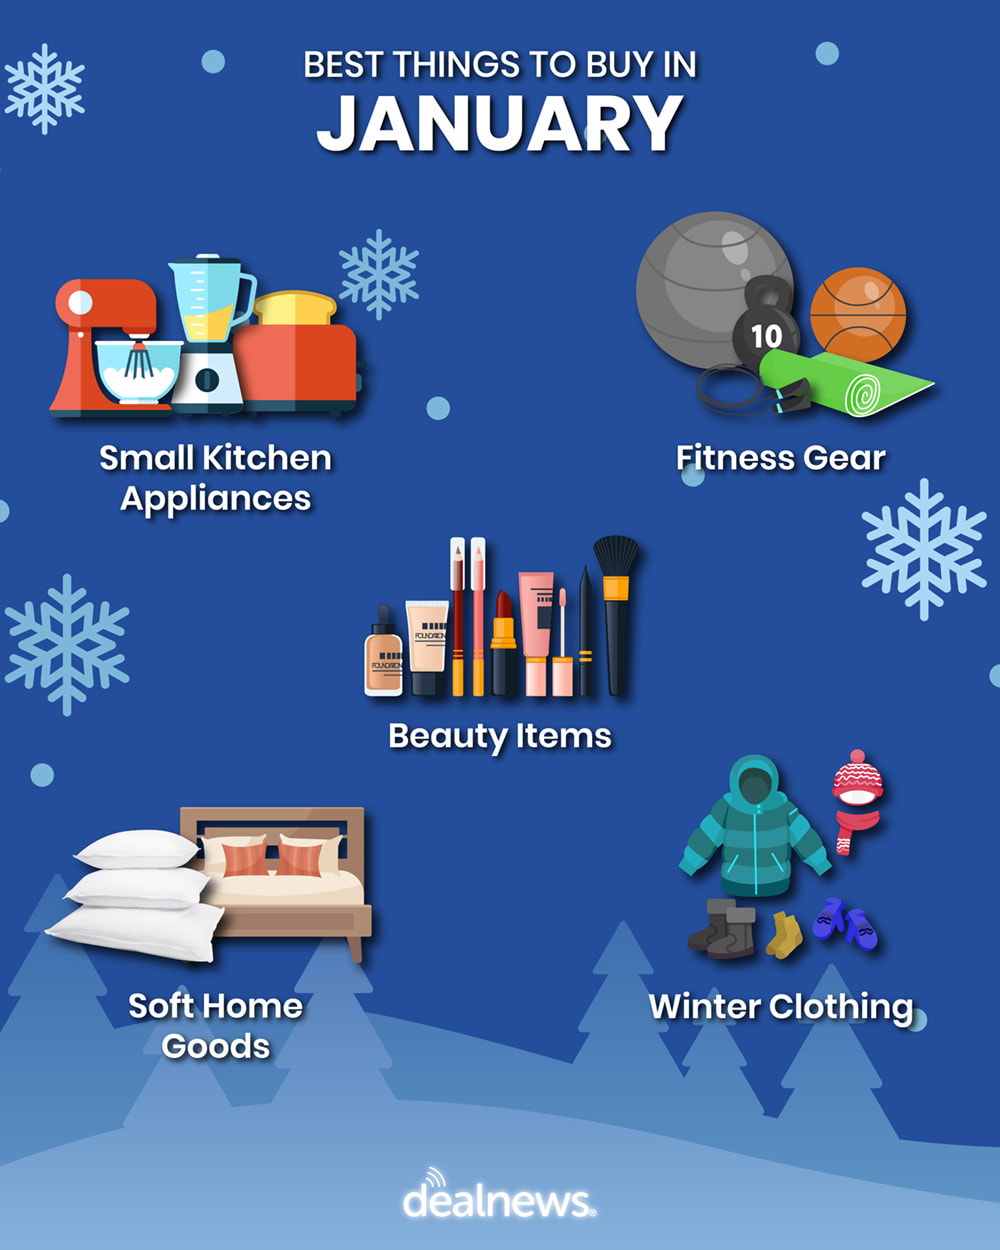 Five of the best things to buy in January shown in infographic.